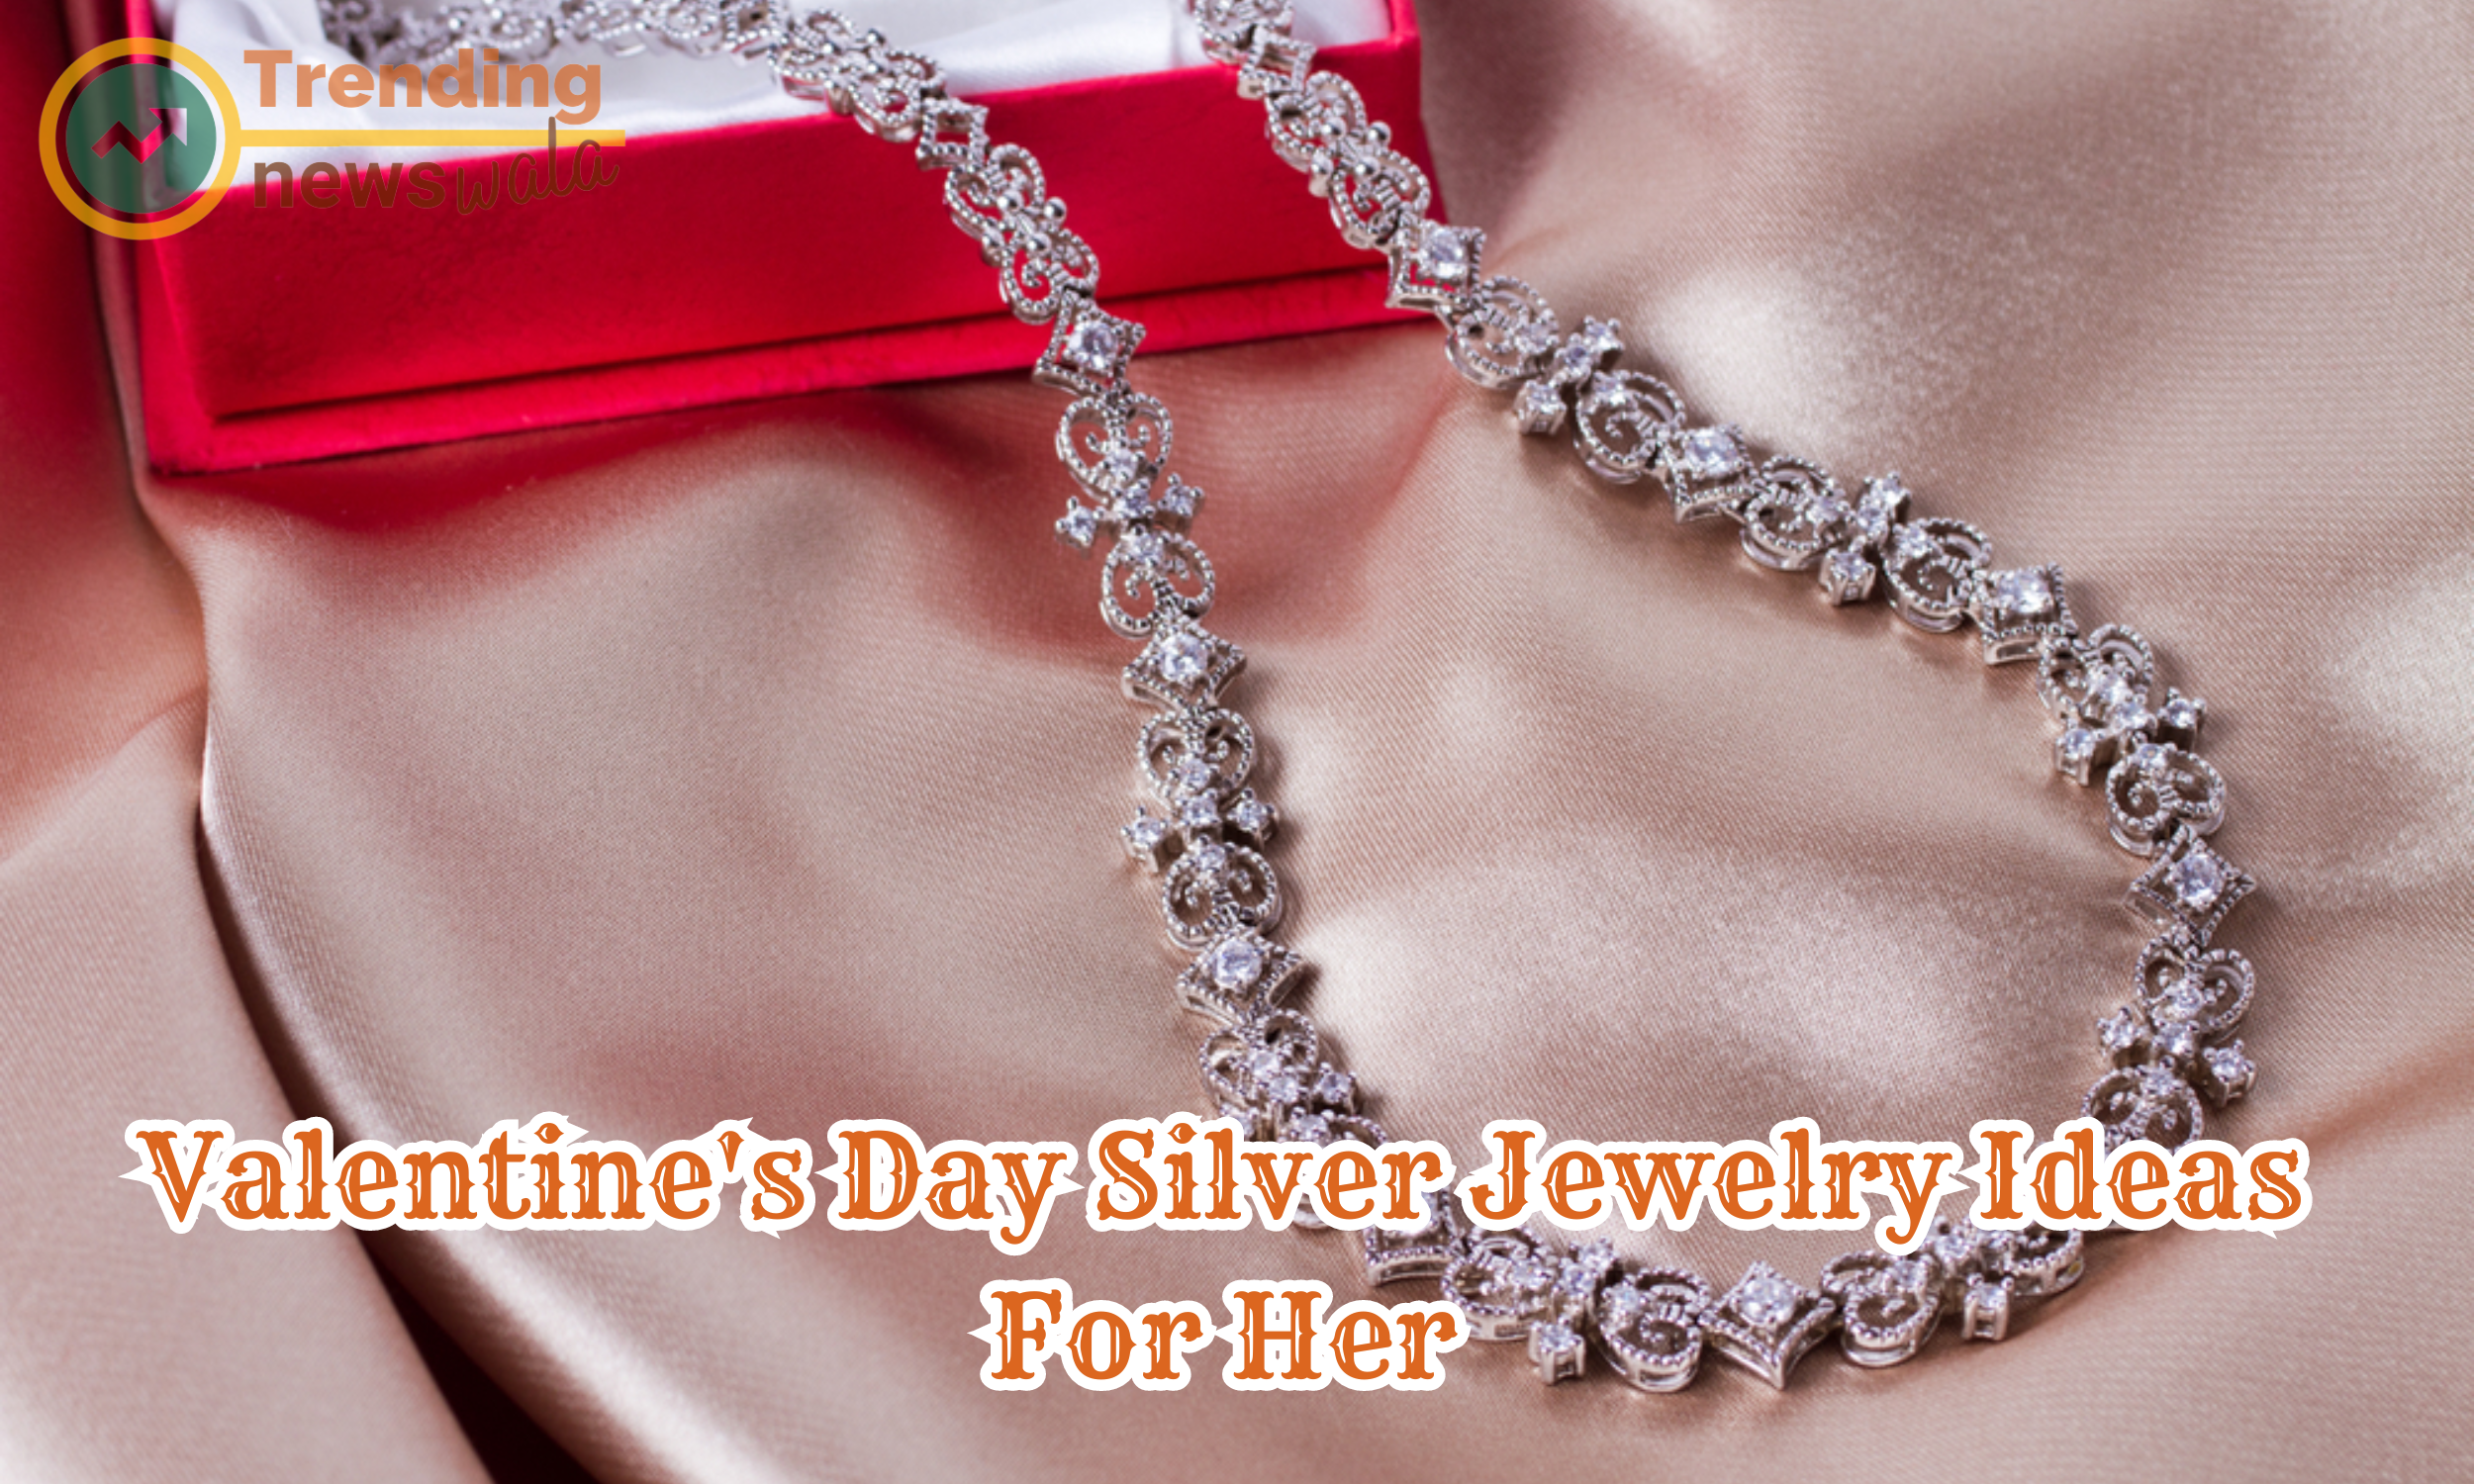 How an Exotic Silver Jewelry Can Help in Impressing Your Valentine